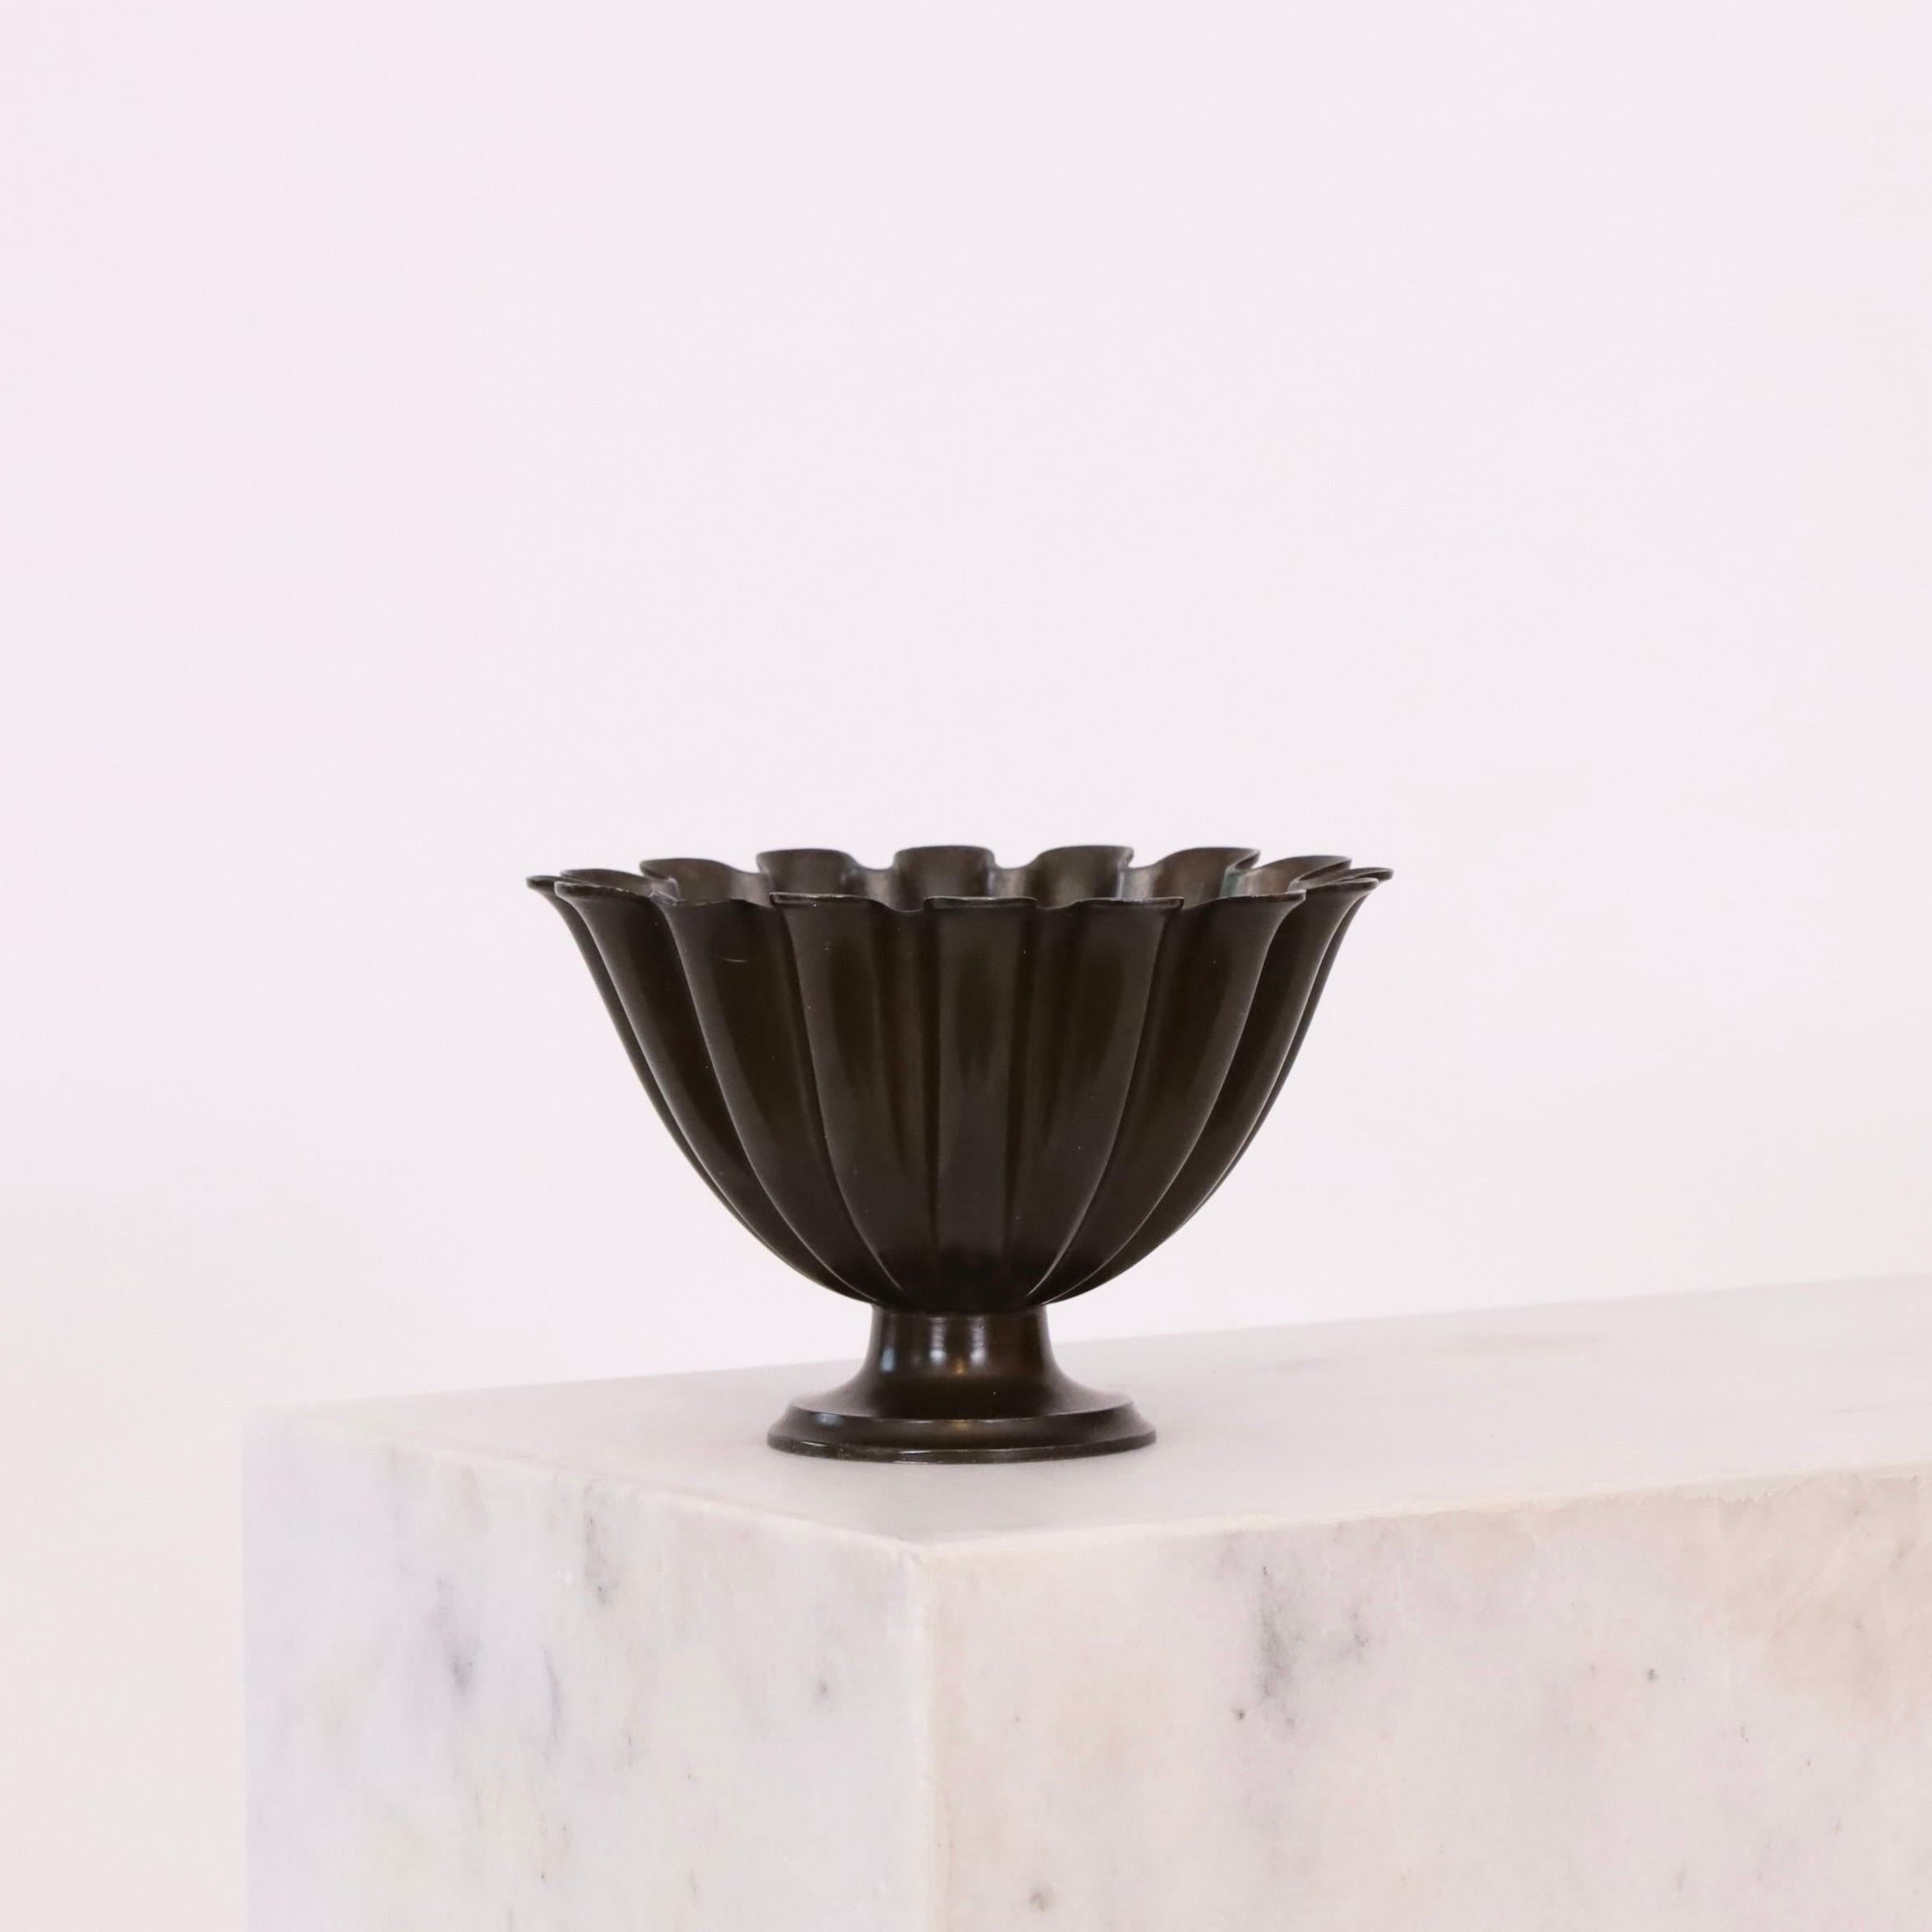 Bronze Scalloped pedestal discometal bowl by Just Andersen 1920s, Denmark For Sale